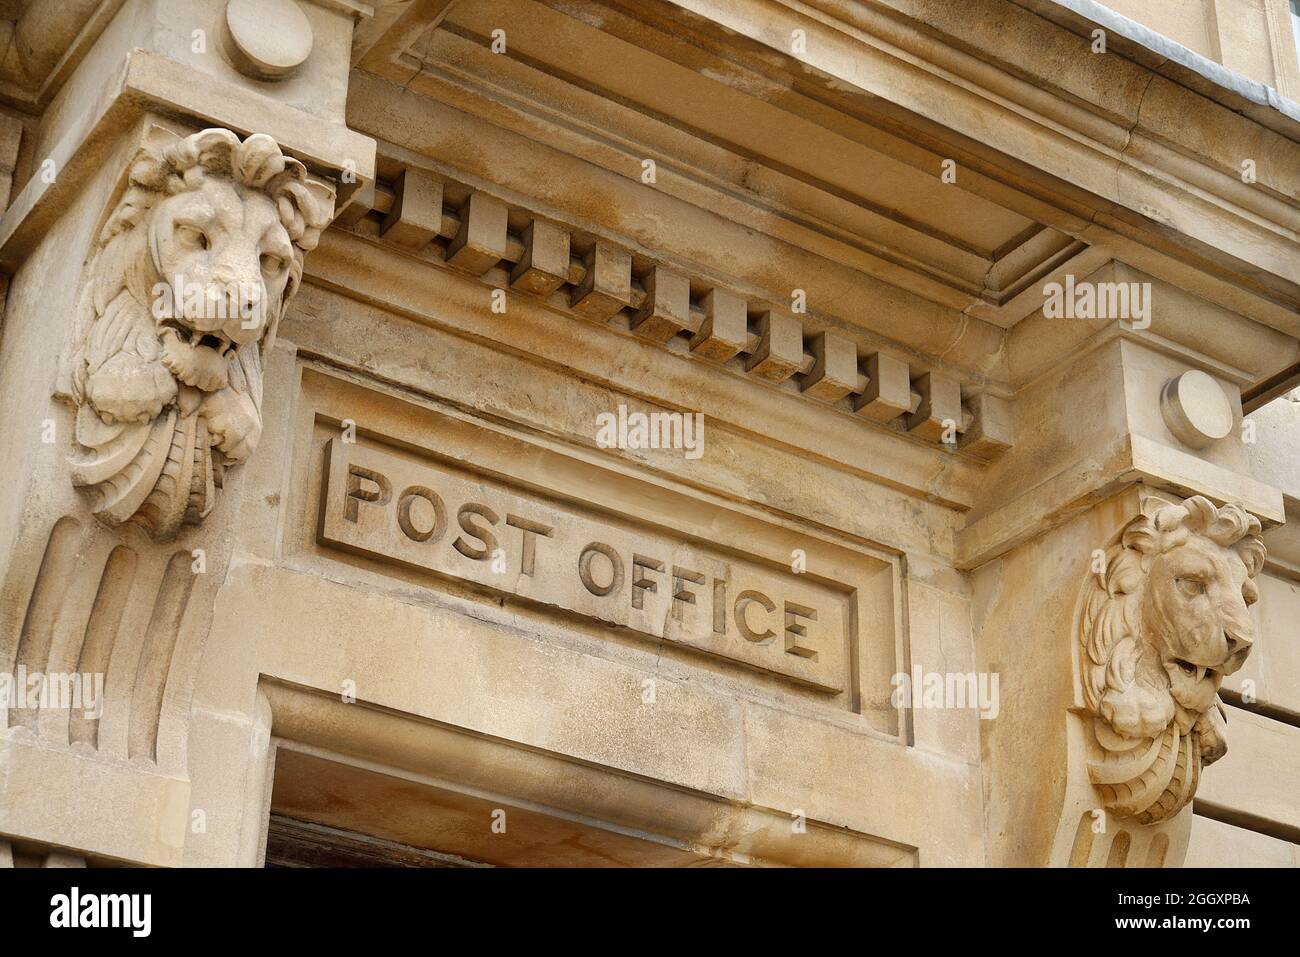 An old Post Office entrance doorway or portico. A grand stone facade with carved stone lions. A regal and important place to go. Stock Photo